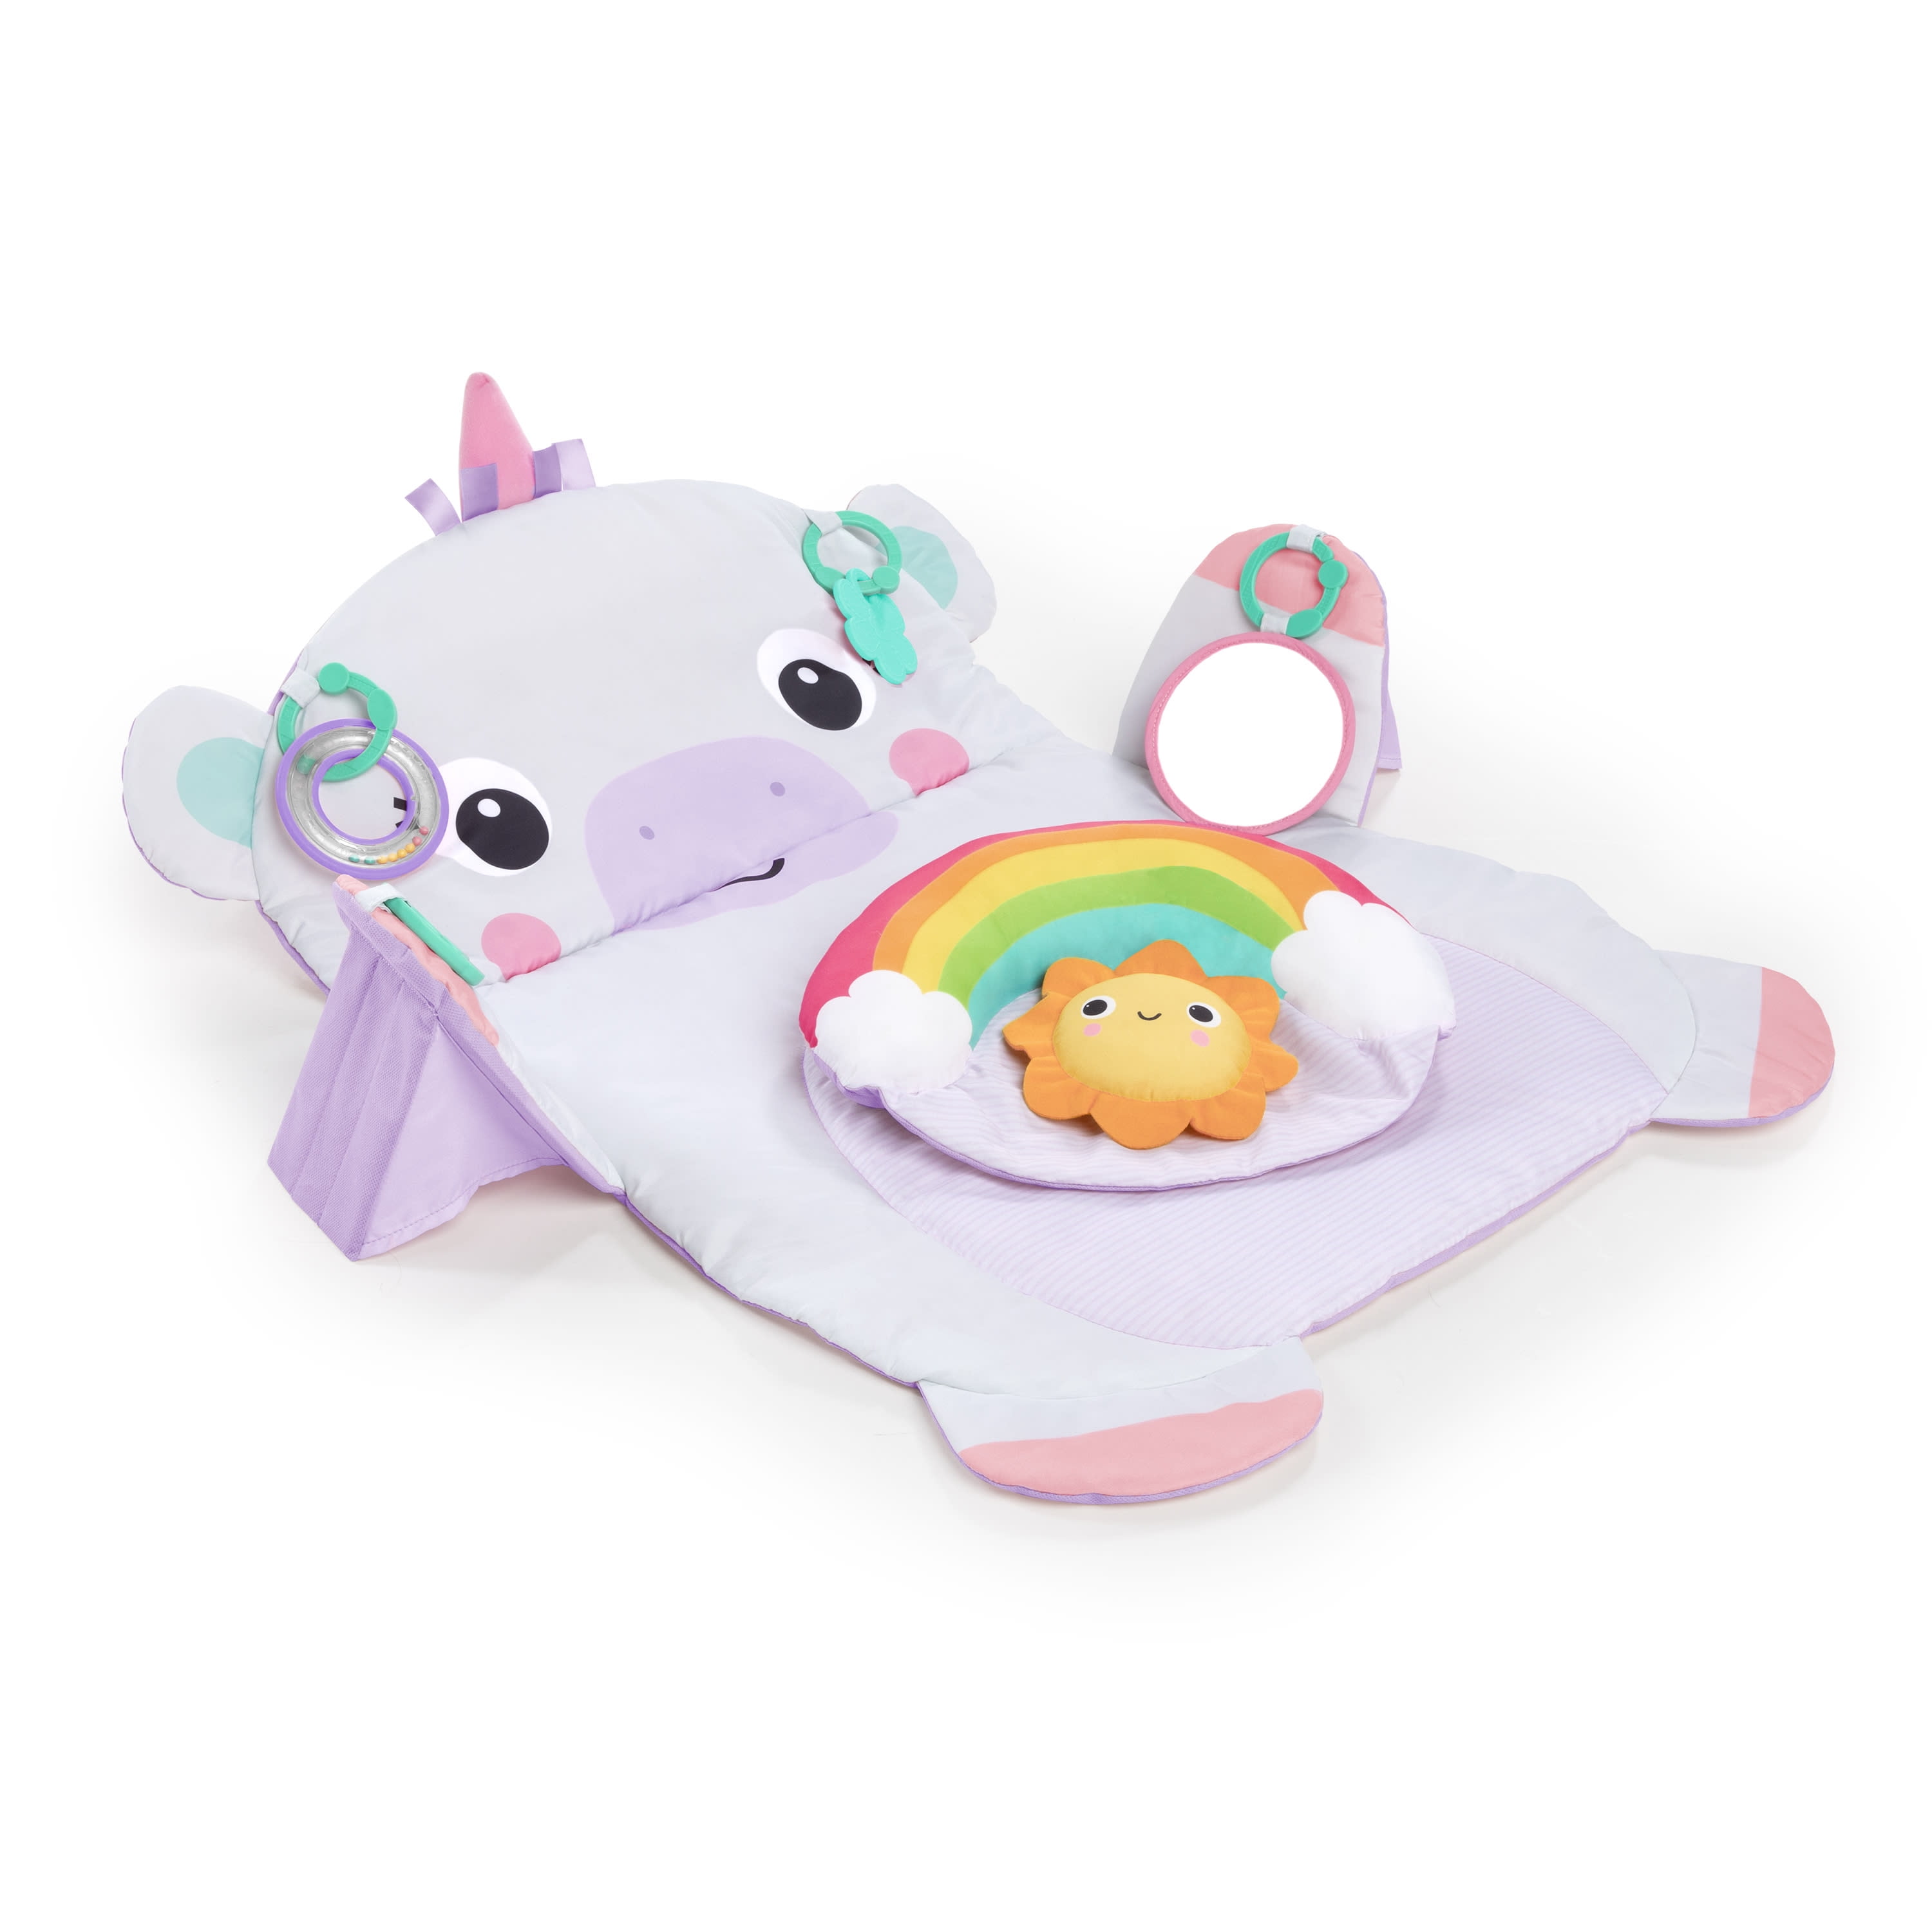 Bright Starts Tummy Time Prop & Play Baby Activity Mat for Infants, Unicorn, Unisex